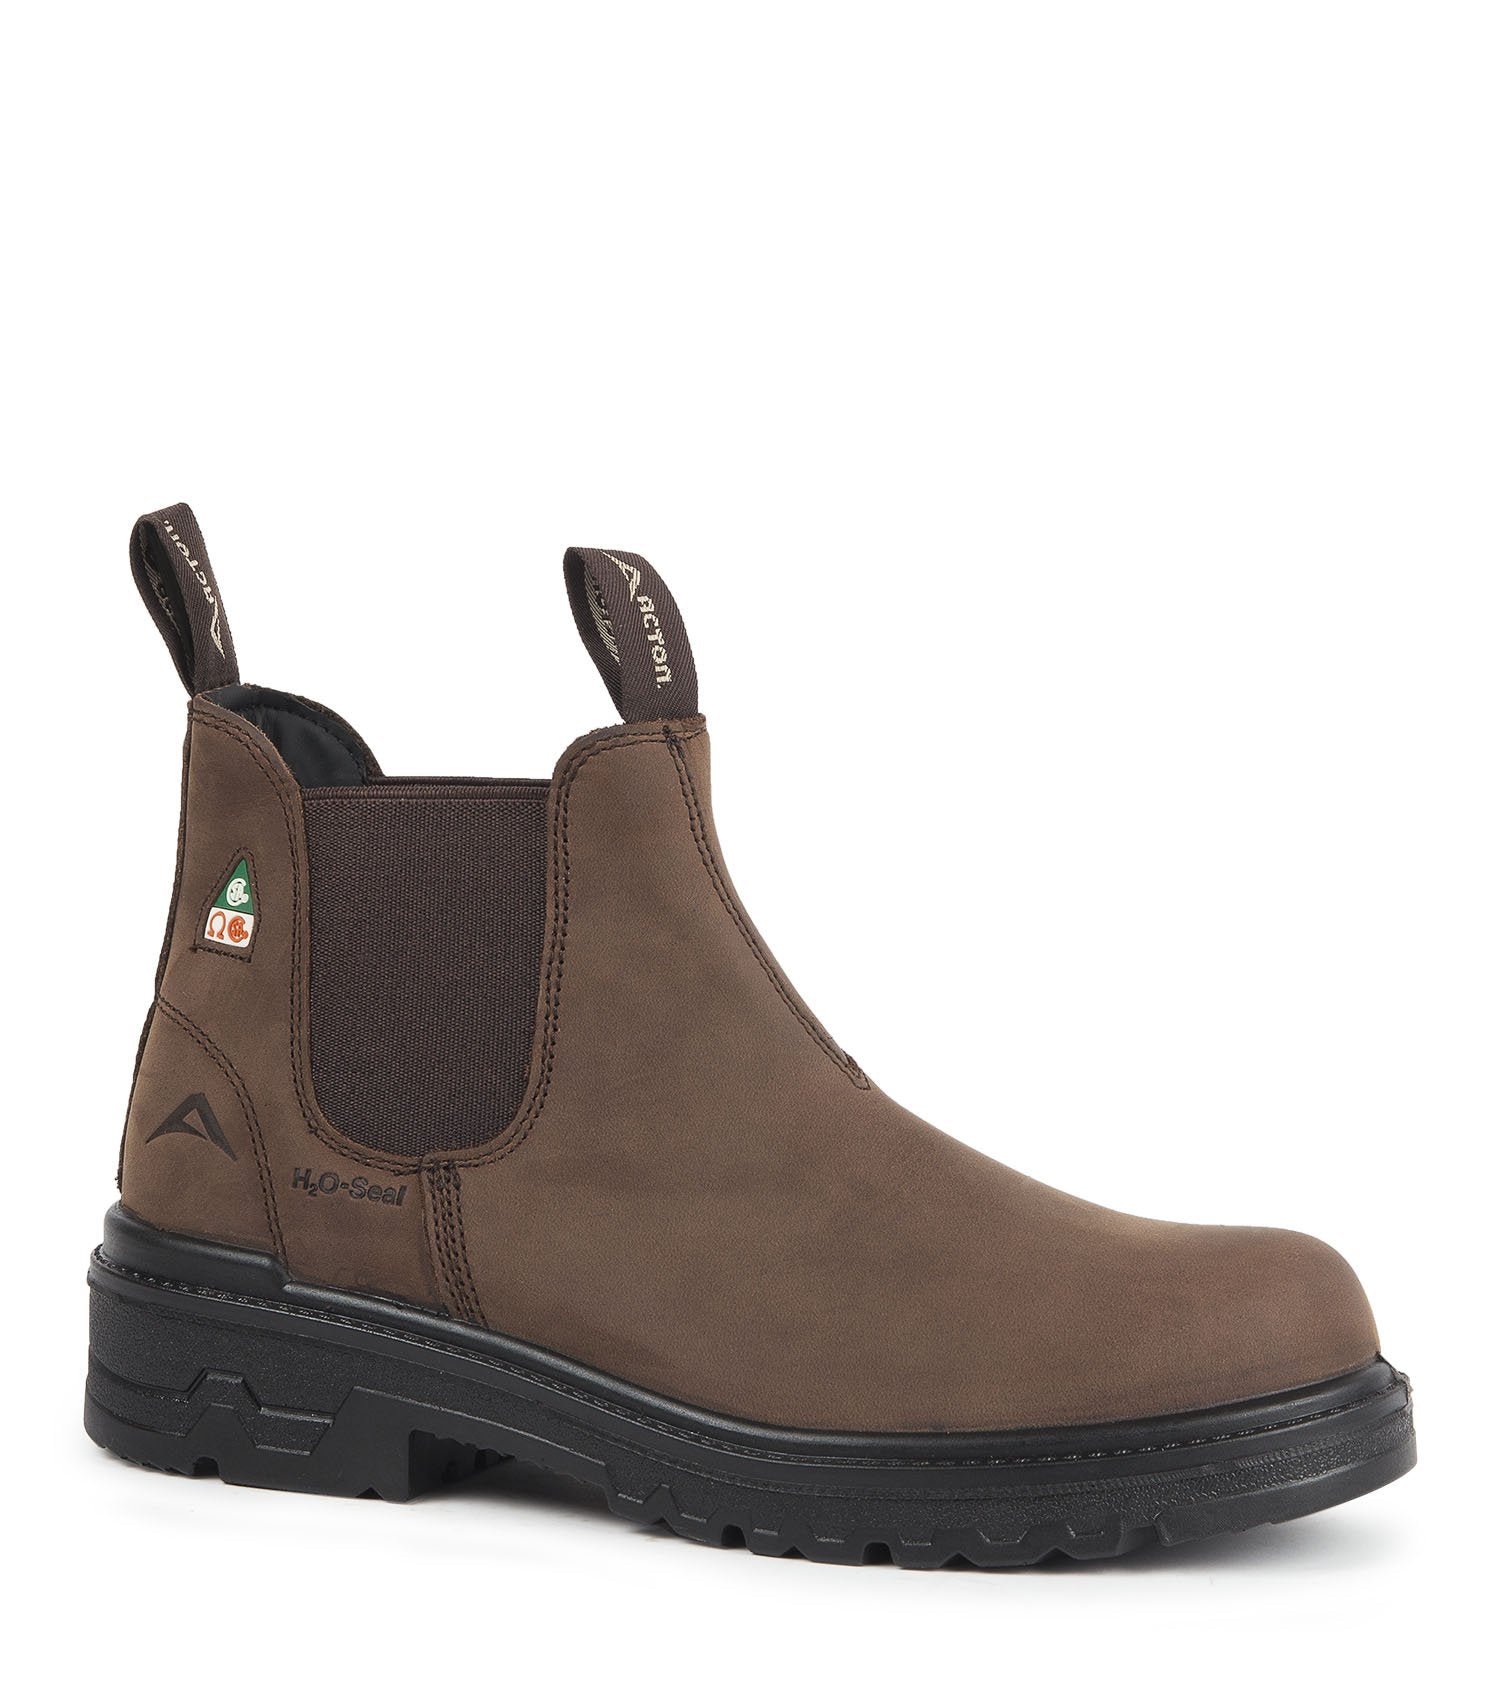 Acton Profile 6" Steel Toe Brown Leather Chelsea Safety Work Boots | Brown | Sizes 4 - 14 Work Boots - Cleanflow